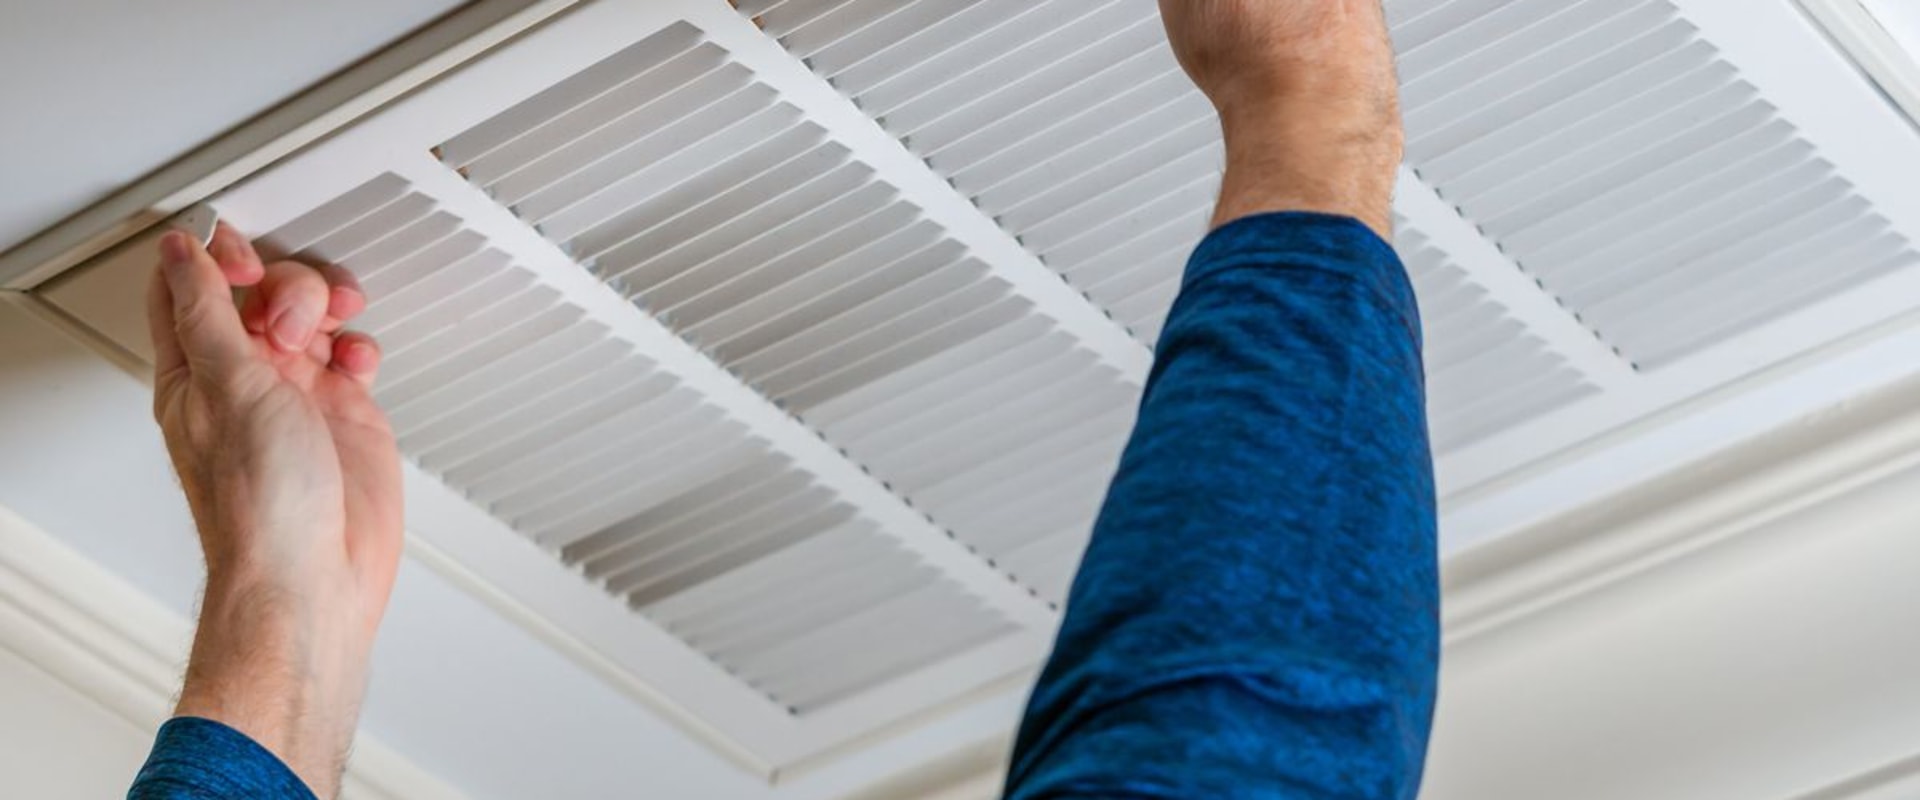 Why You Should Replace Your Air Filter Regularly